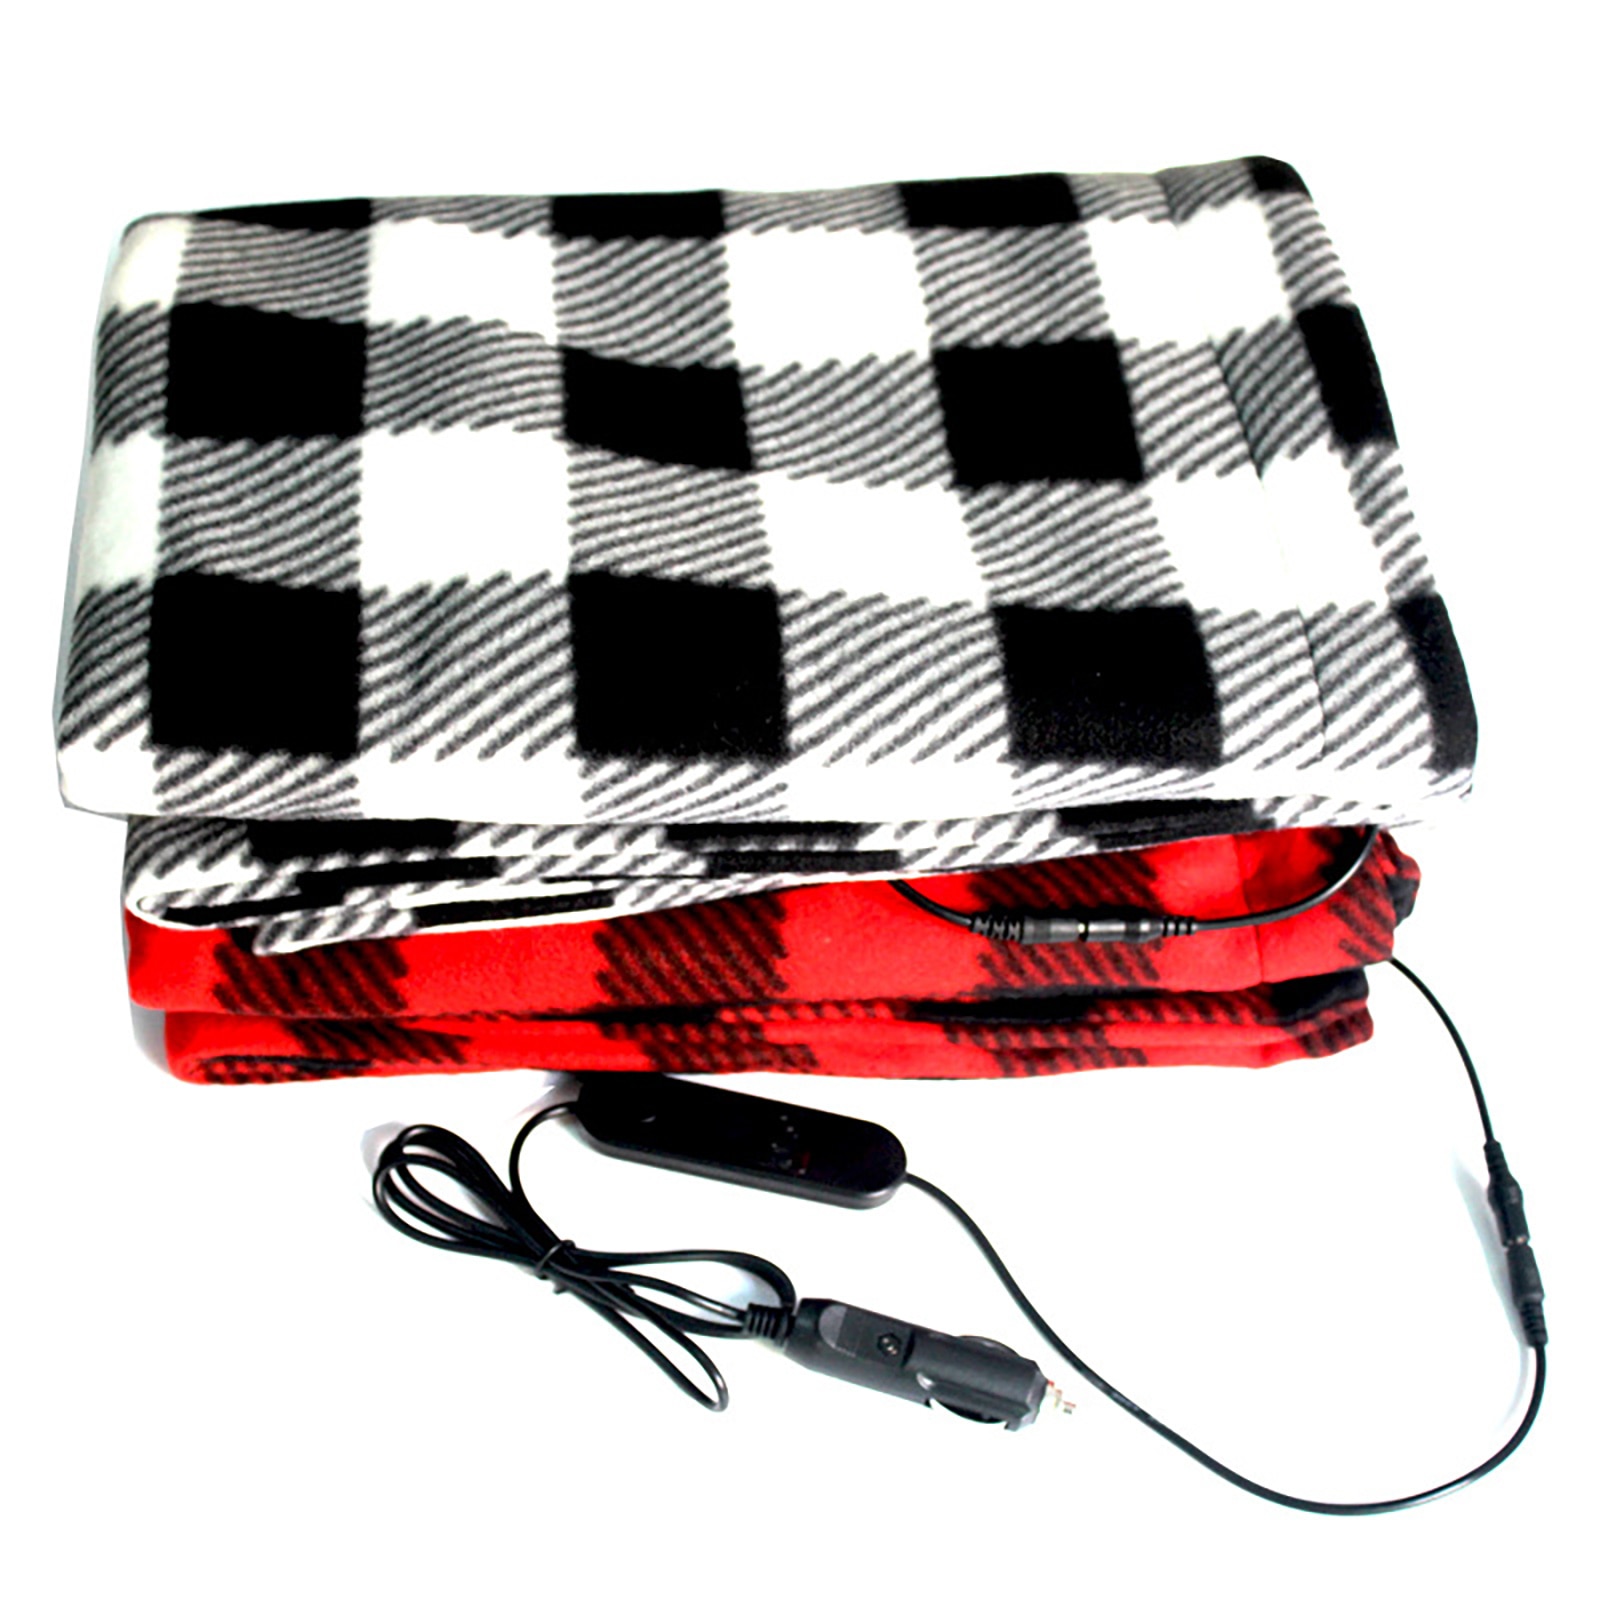 12V Car Electric Heating Blanket Heated Fleece Travel Throw with Patented Safety Timer Constant Temperature Heating Blanket